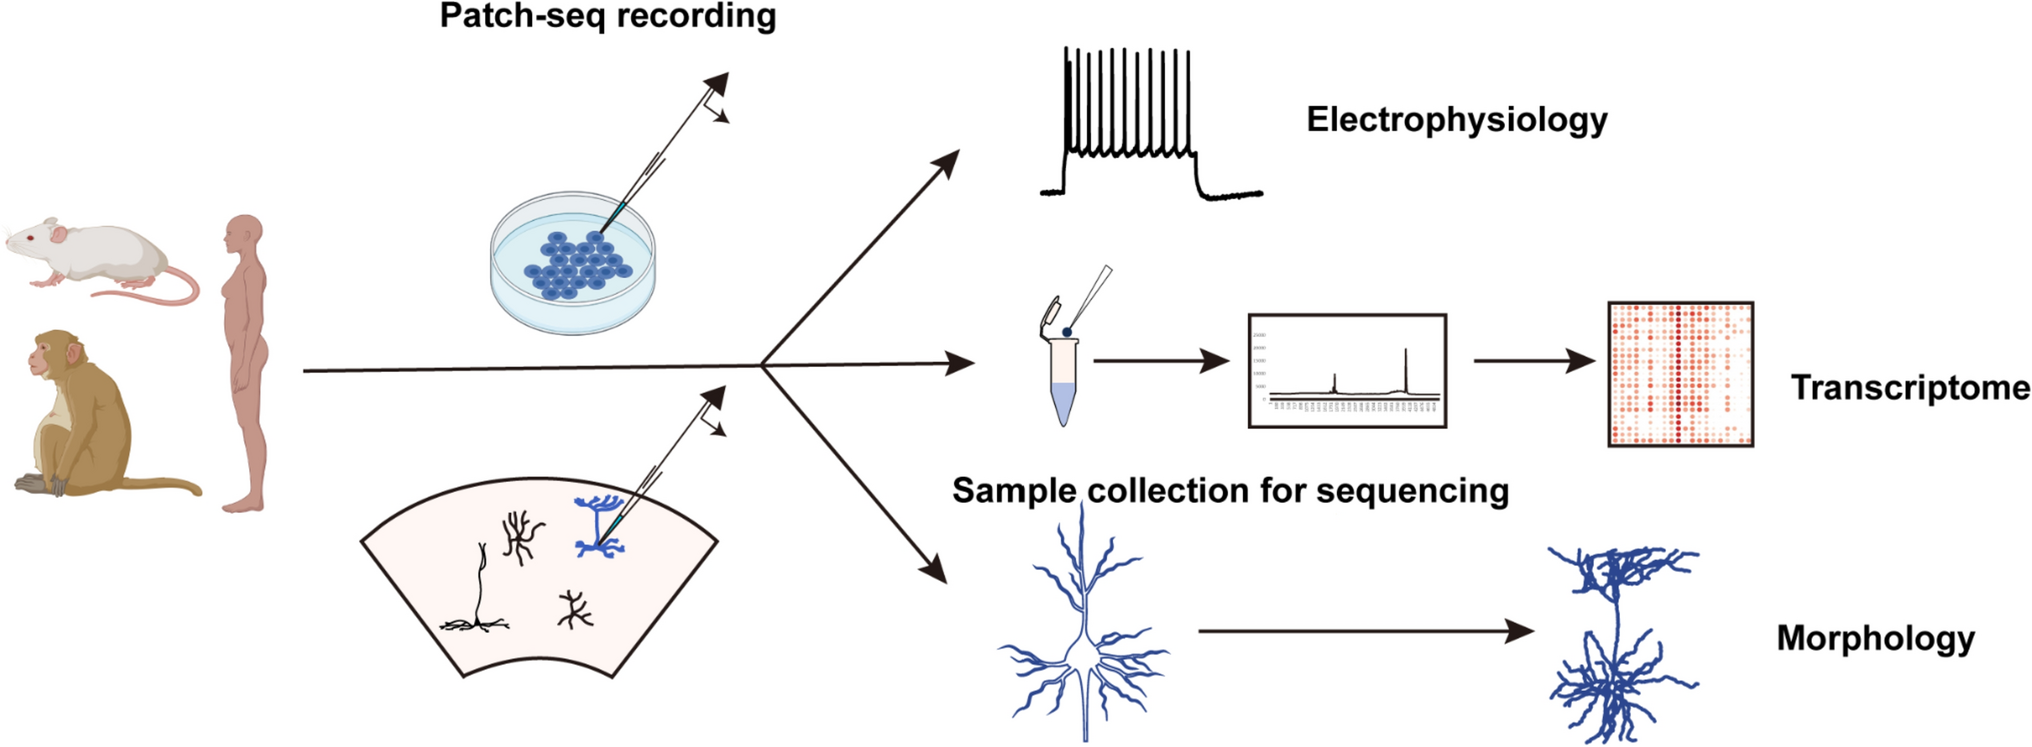 Patch-seq: Advances and Biological Applications